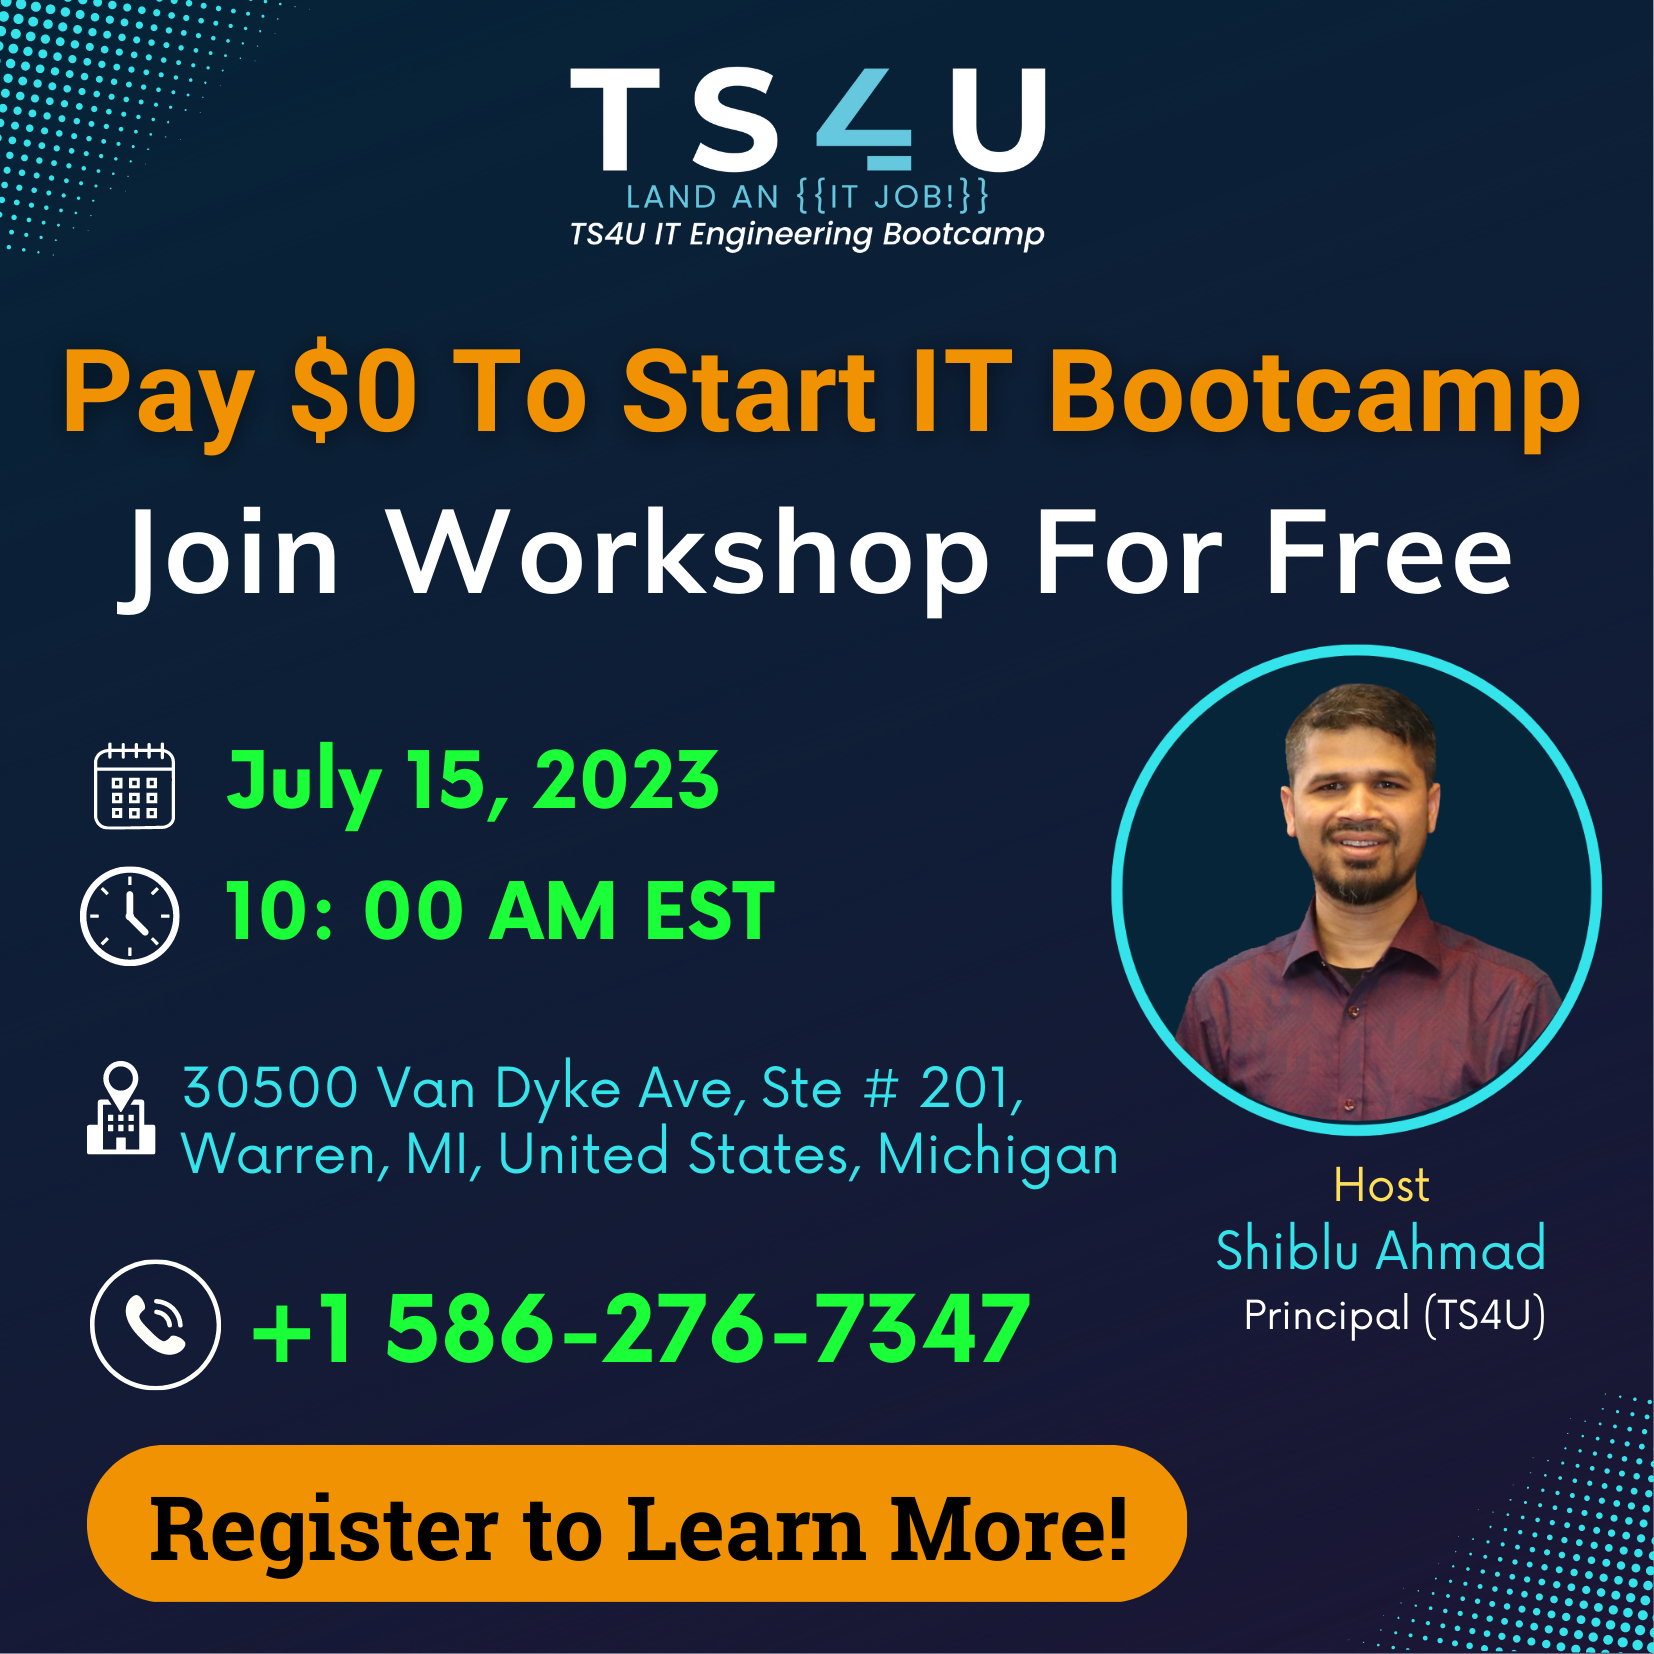 Start IT Bootcamp with $0 upfront and gain higher paychecks